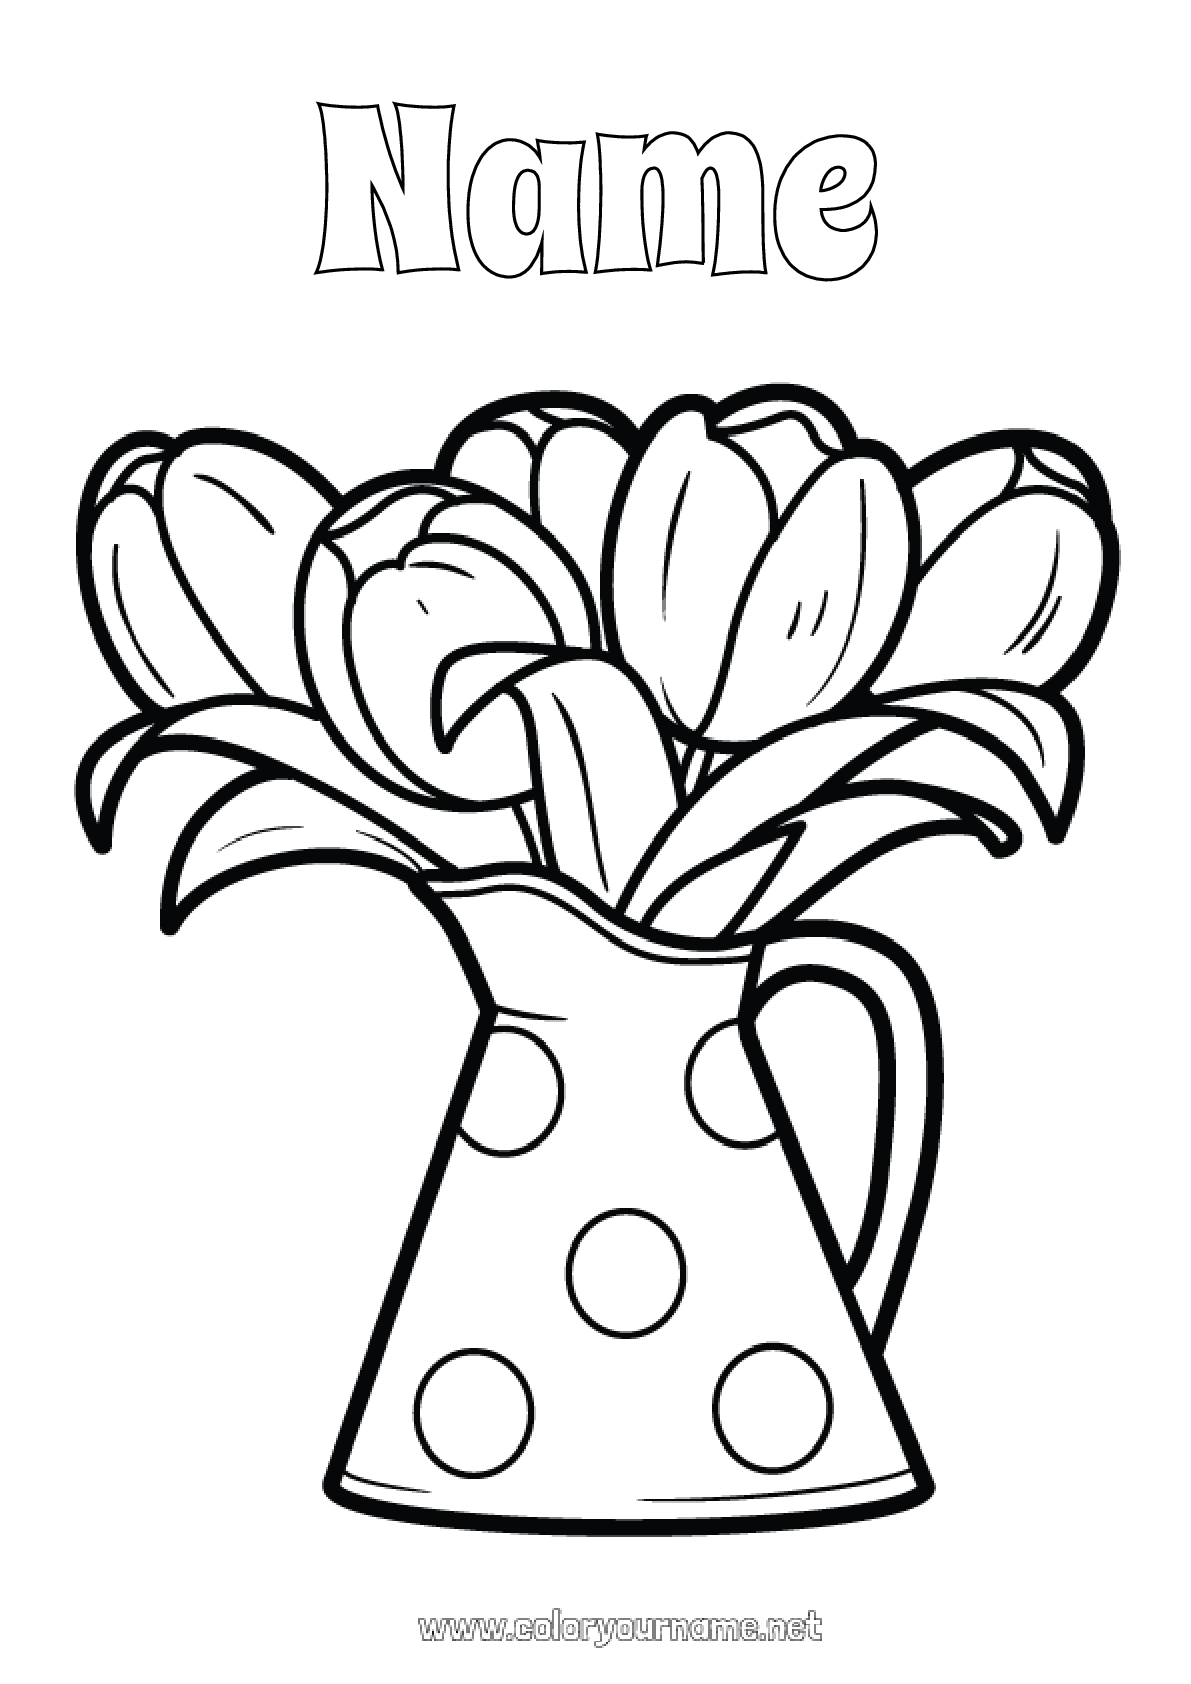 Coloring page No.1598 - Flowers Tulip Easy coloring pages